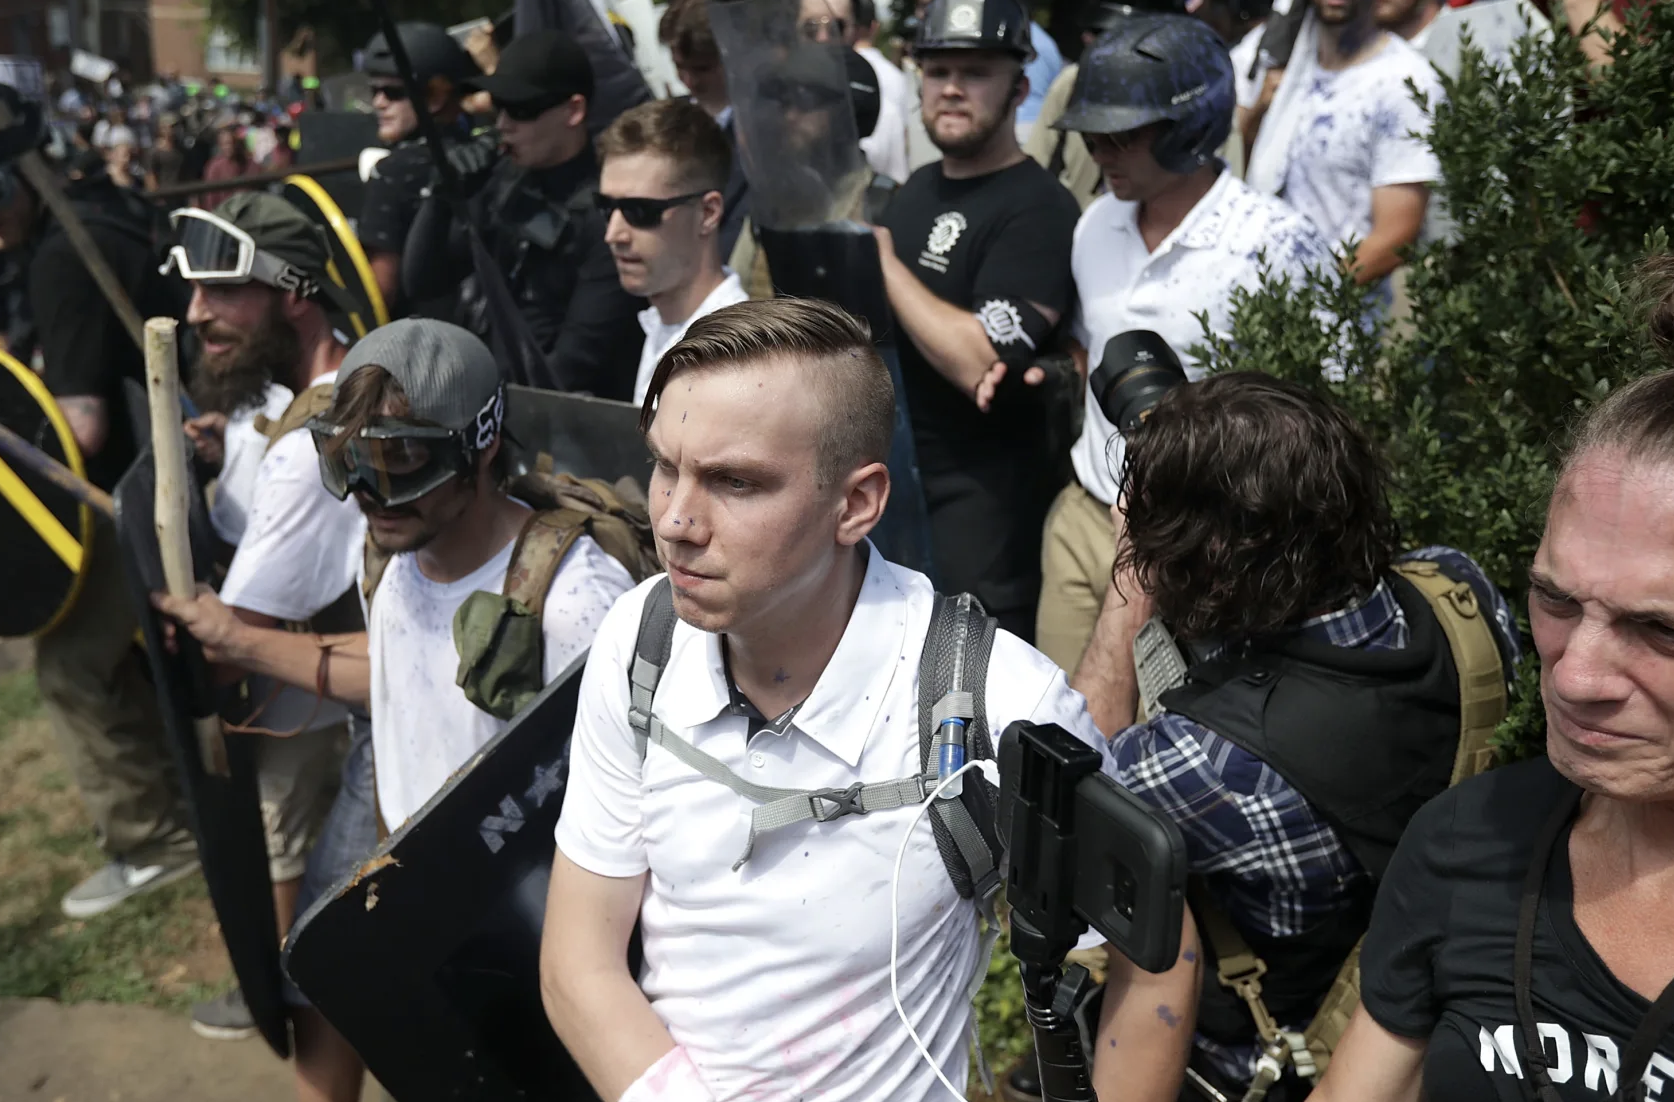 How Social Media Helped Organize and Radicalize America's White Supremacists